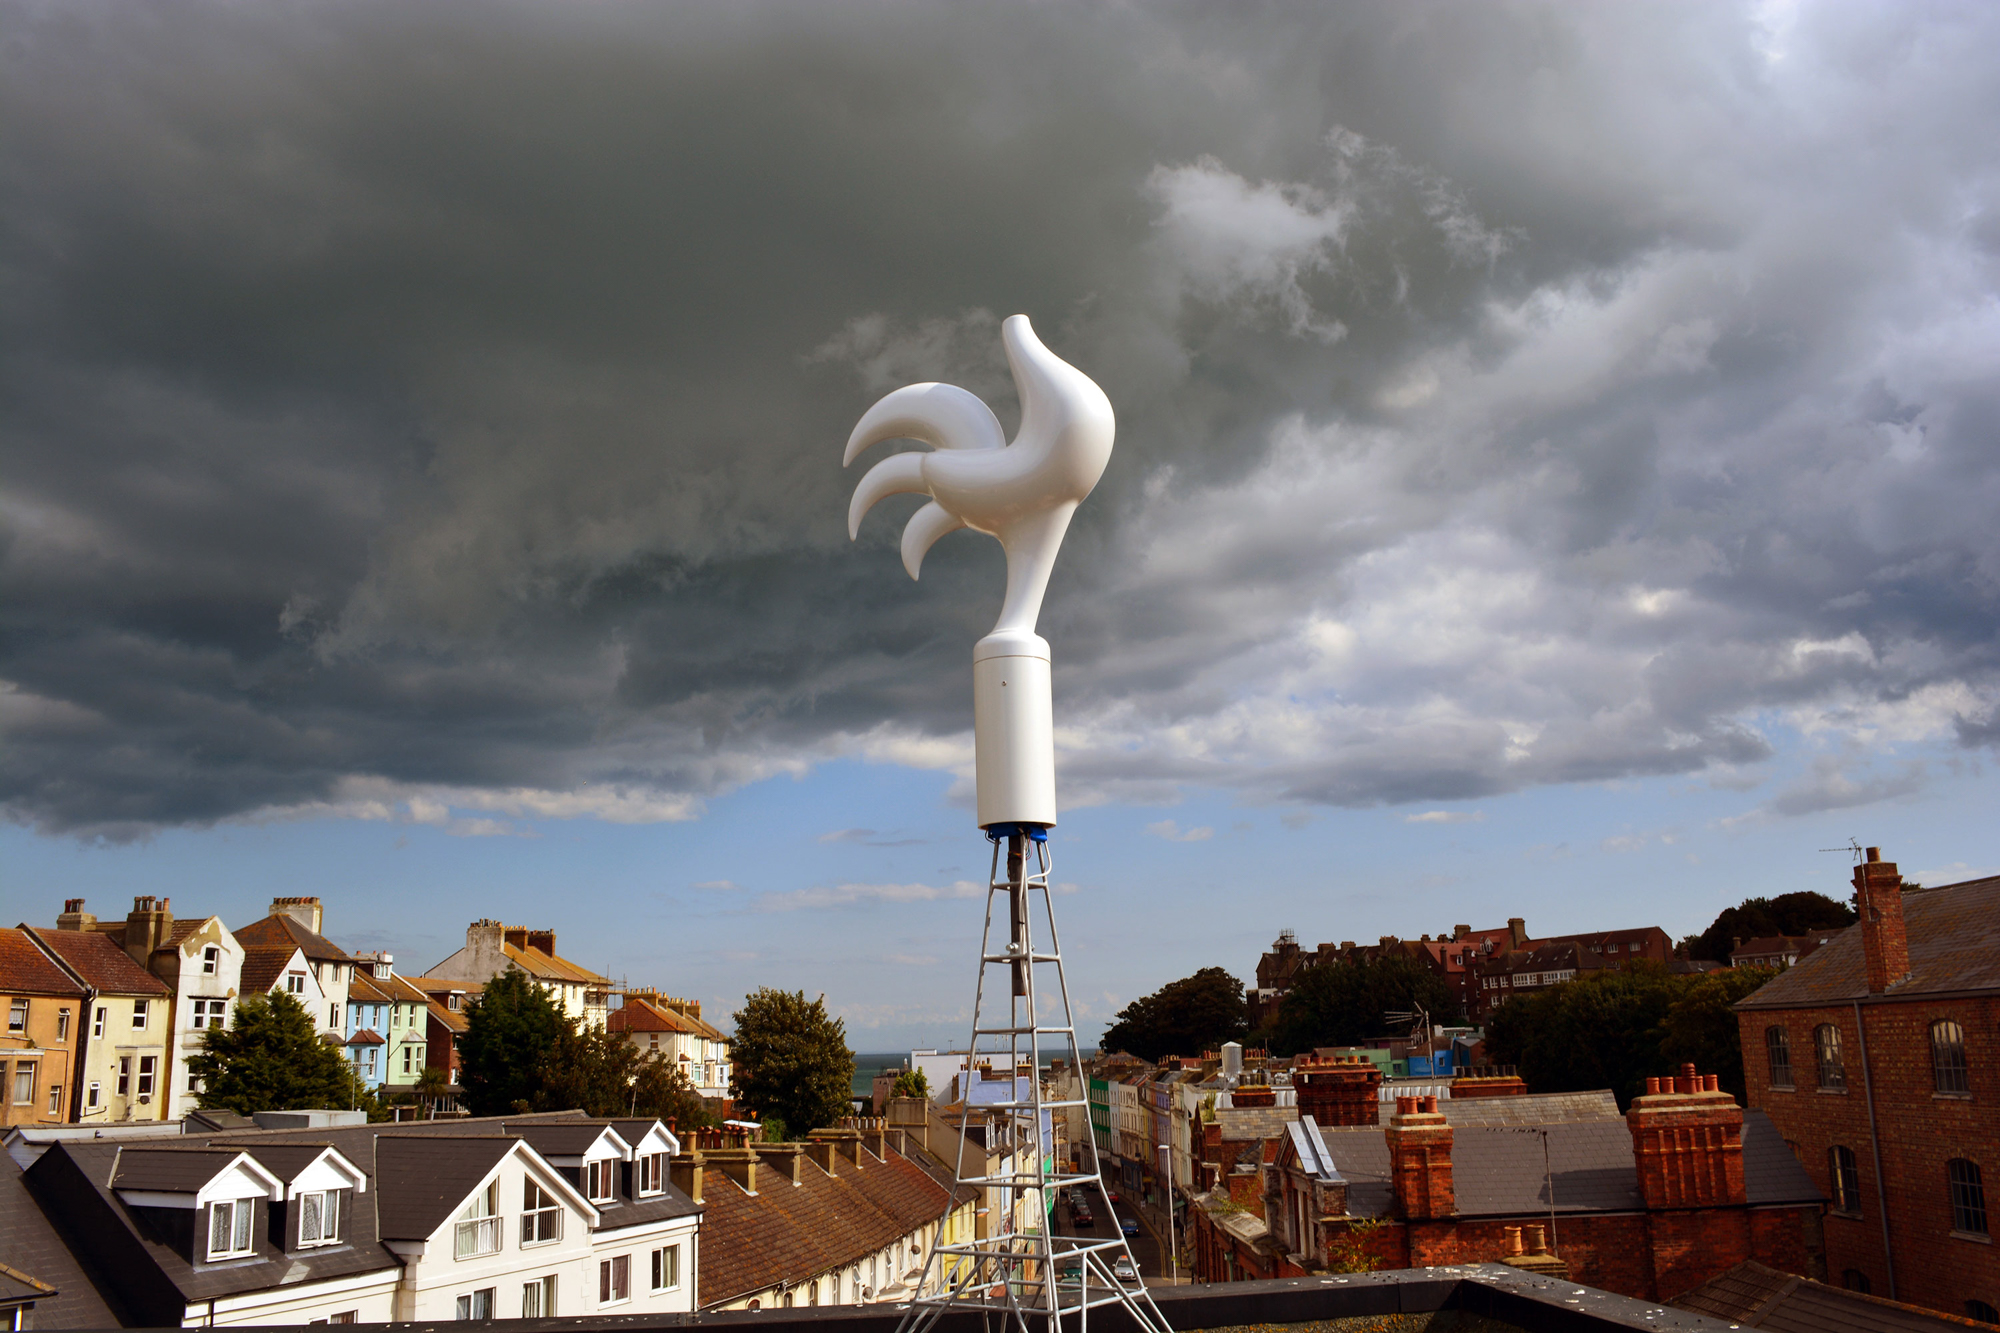 A photograph of a curvaceous, stylized sculpture of a rooster with no head mounted on top of a steel frame made in the proportions of the Eiffel Tower. In the background are the rooftops of an English seaside town. In the far distance on the horizon is the English Channel looking towards France. Overhead, gray storm clouds are forming in an otherwise blue sky.